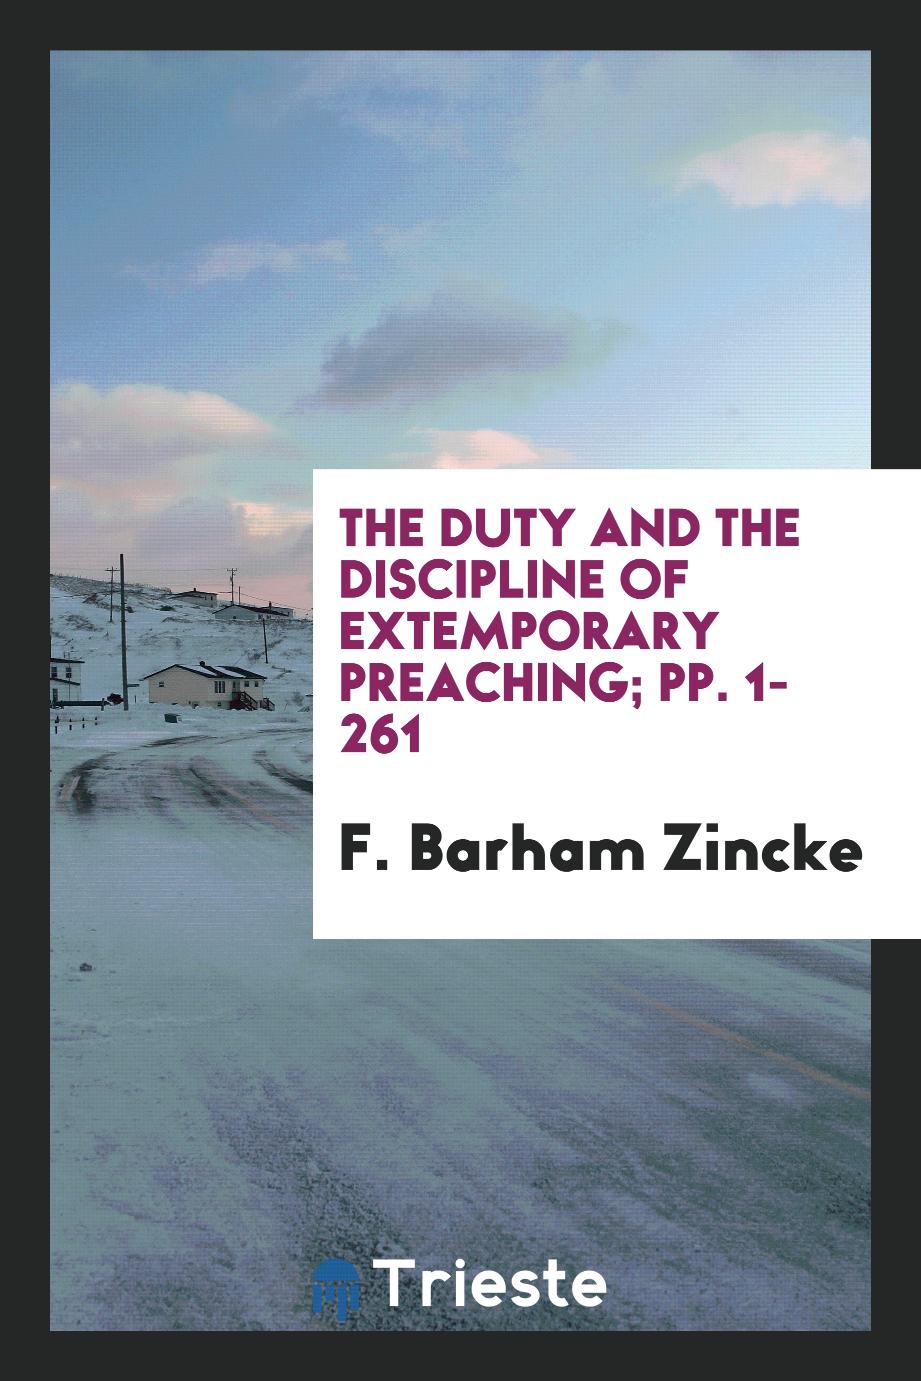 The Duty and the Discipline of Extemporary Preaching; pp. 1-261